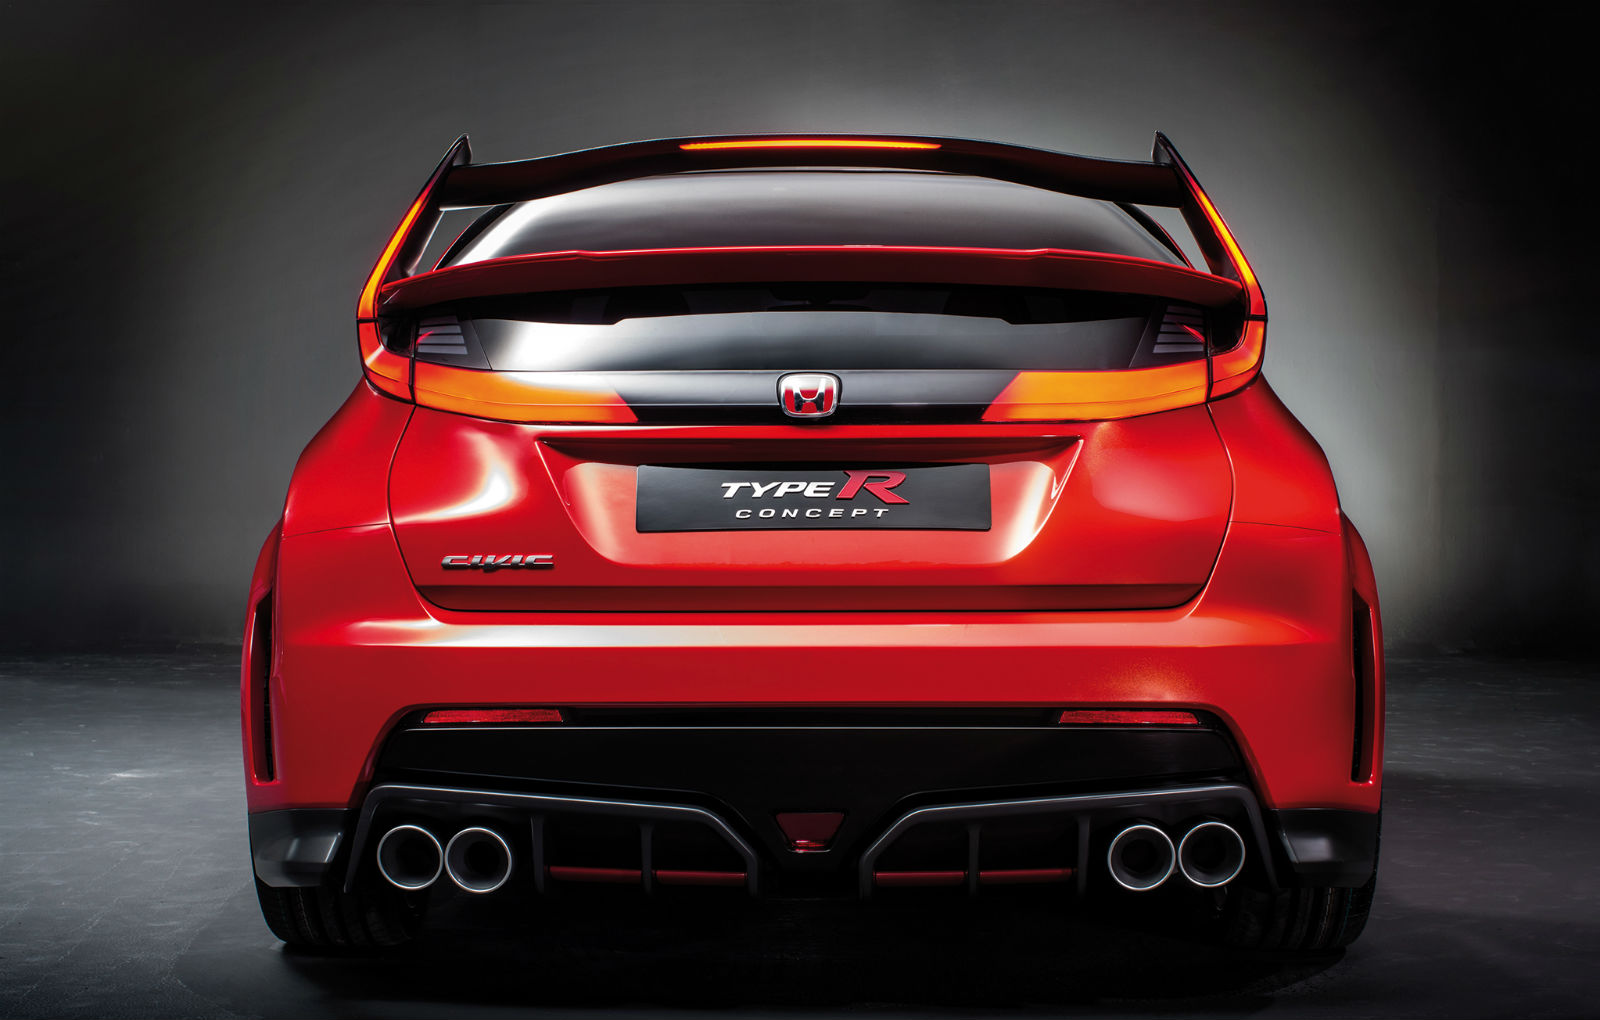 Honda Civic Type R Concept Car Wallpaper With